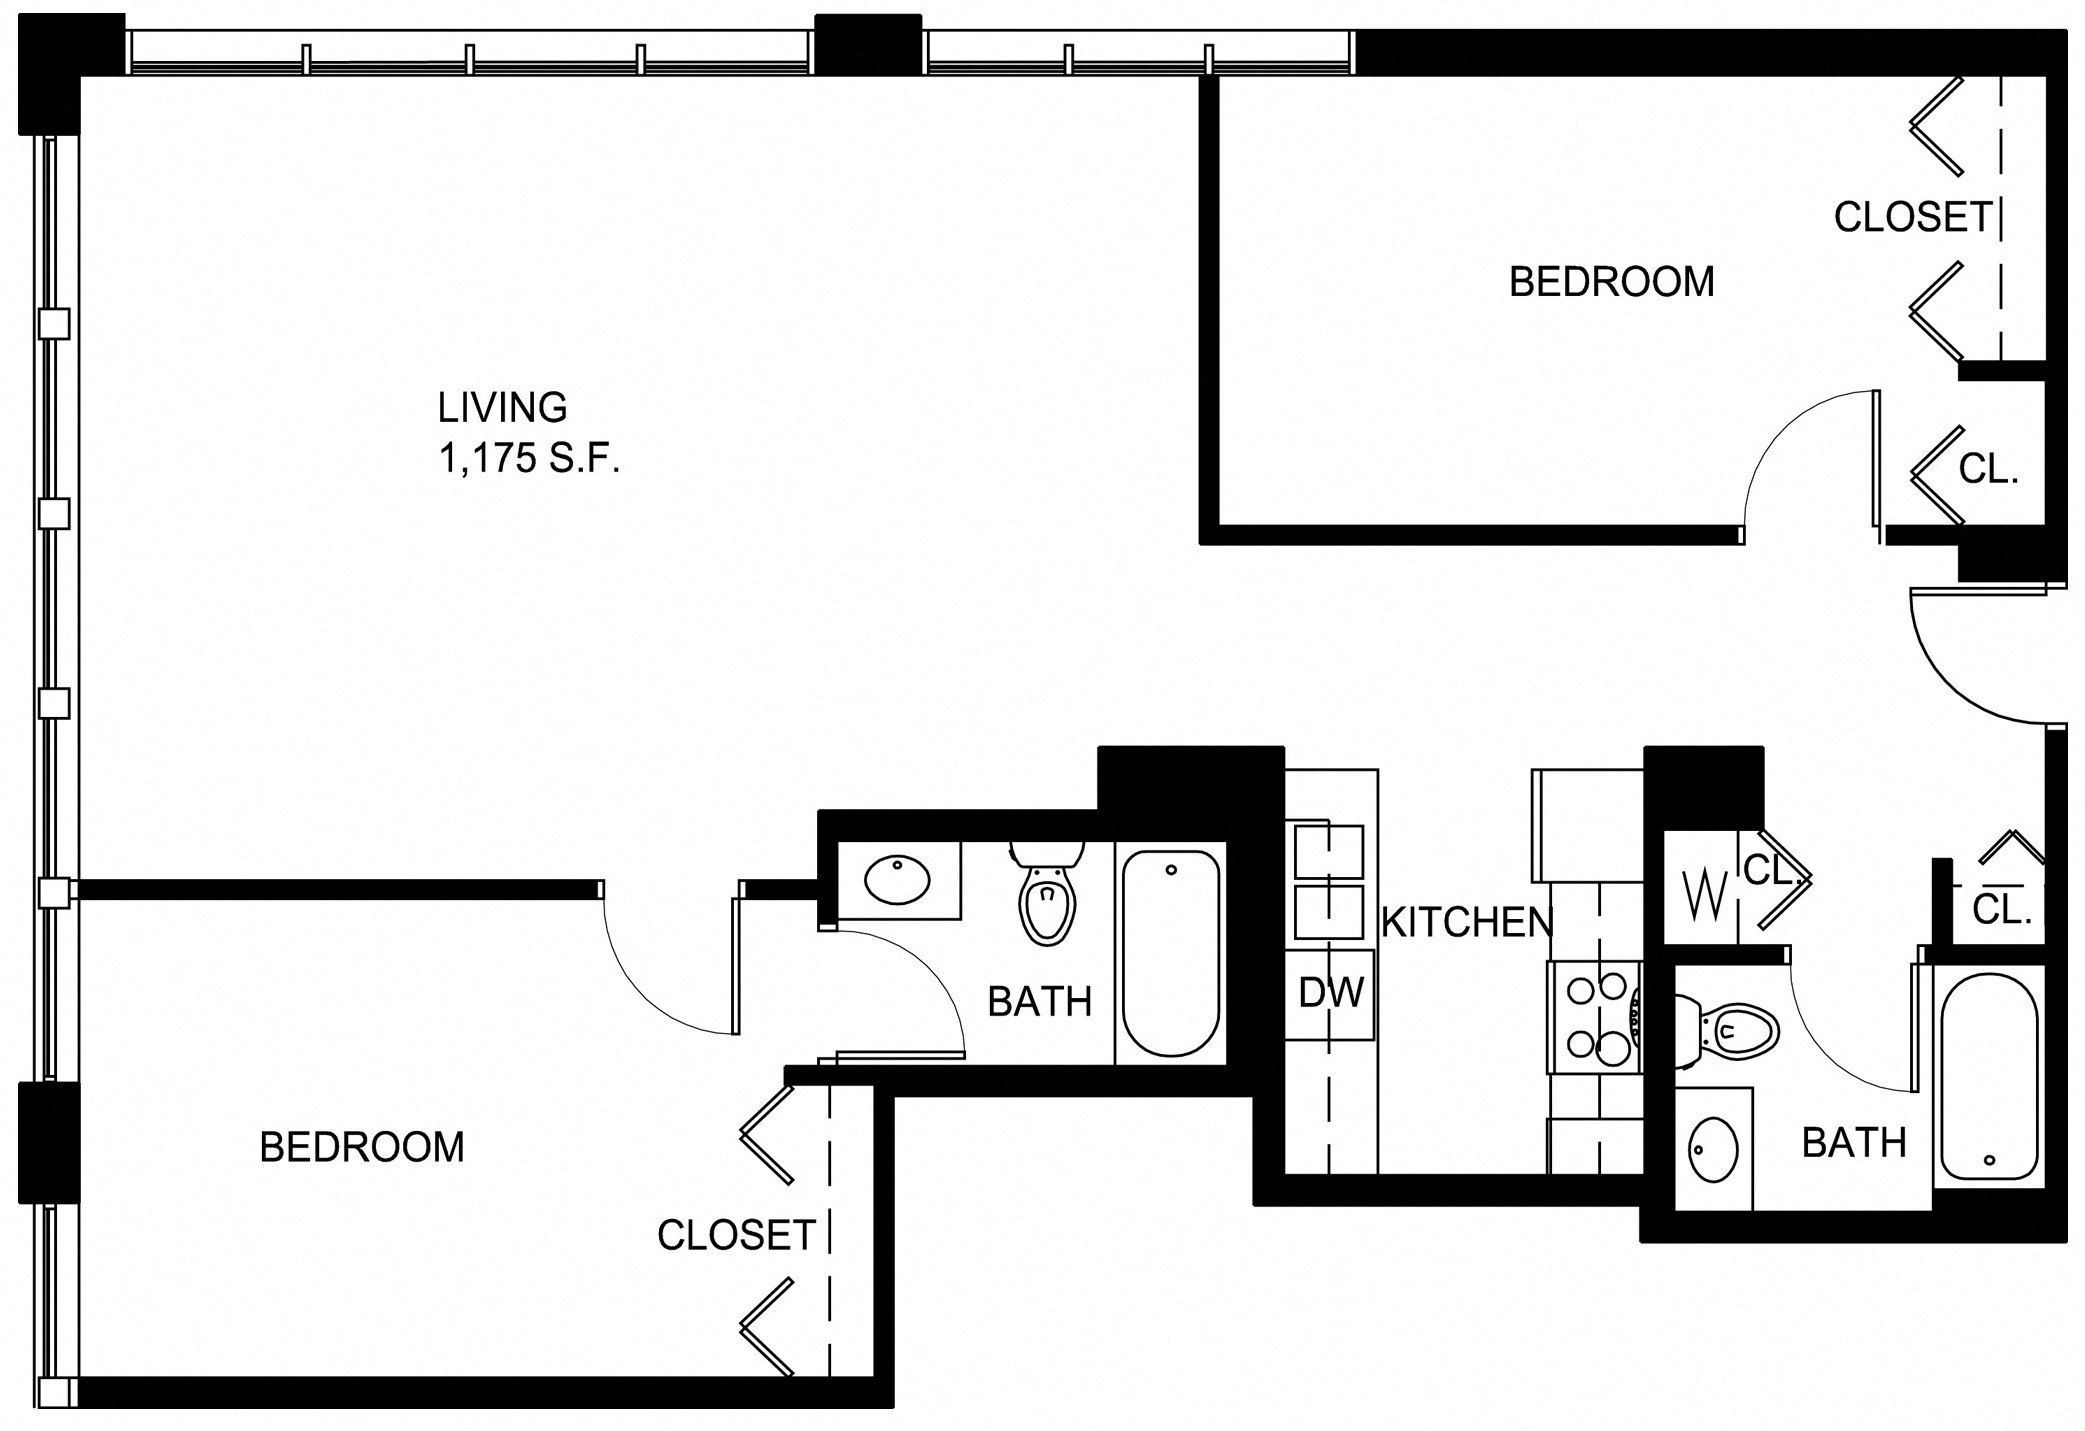 Floorplan for Apartment #P203, 2 bedroom unit at Halstead Providence